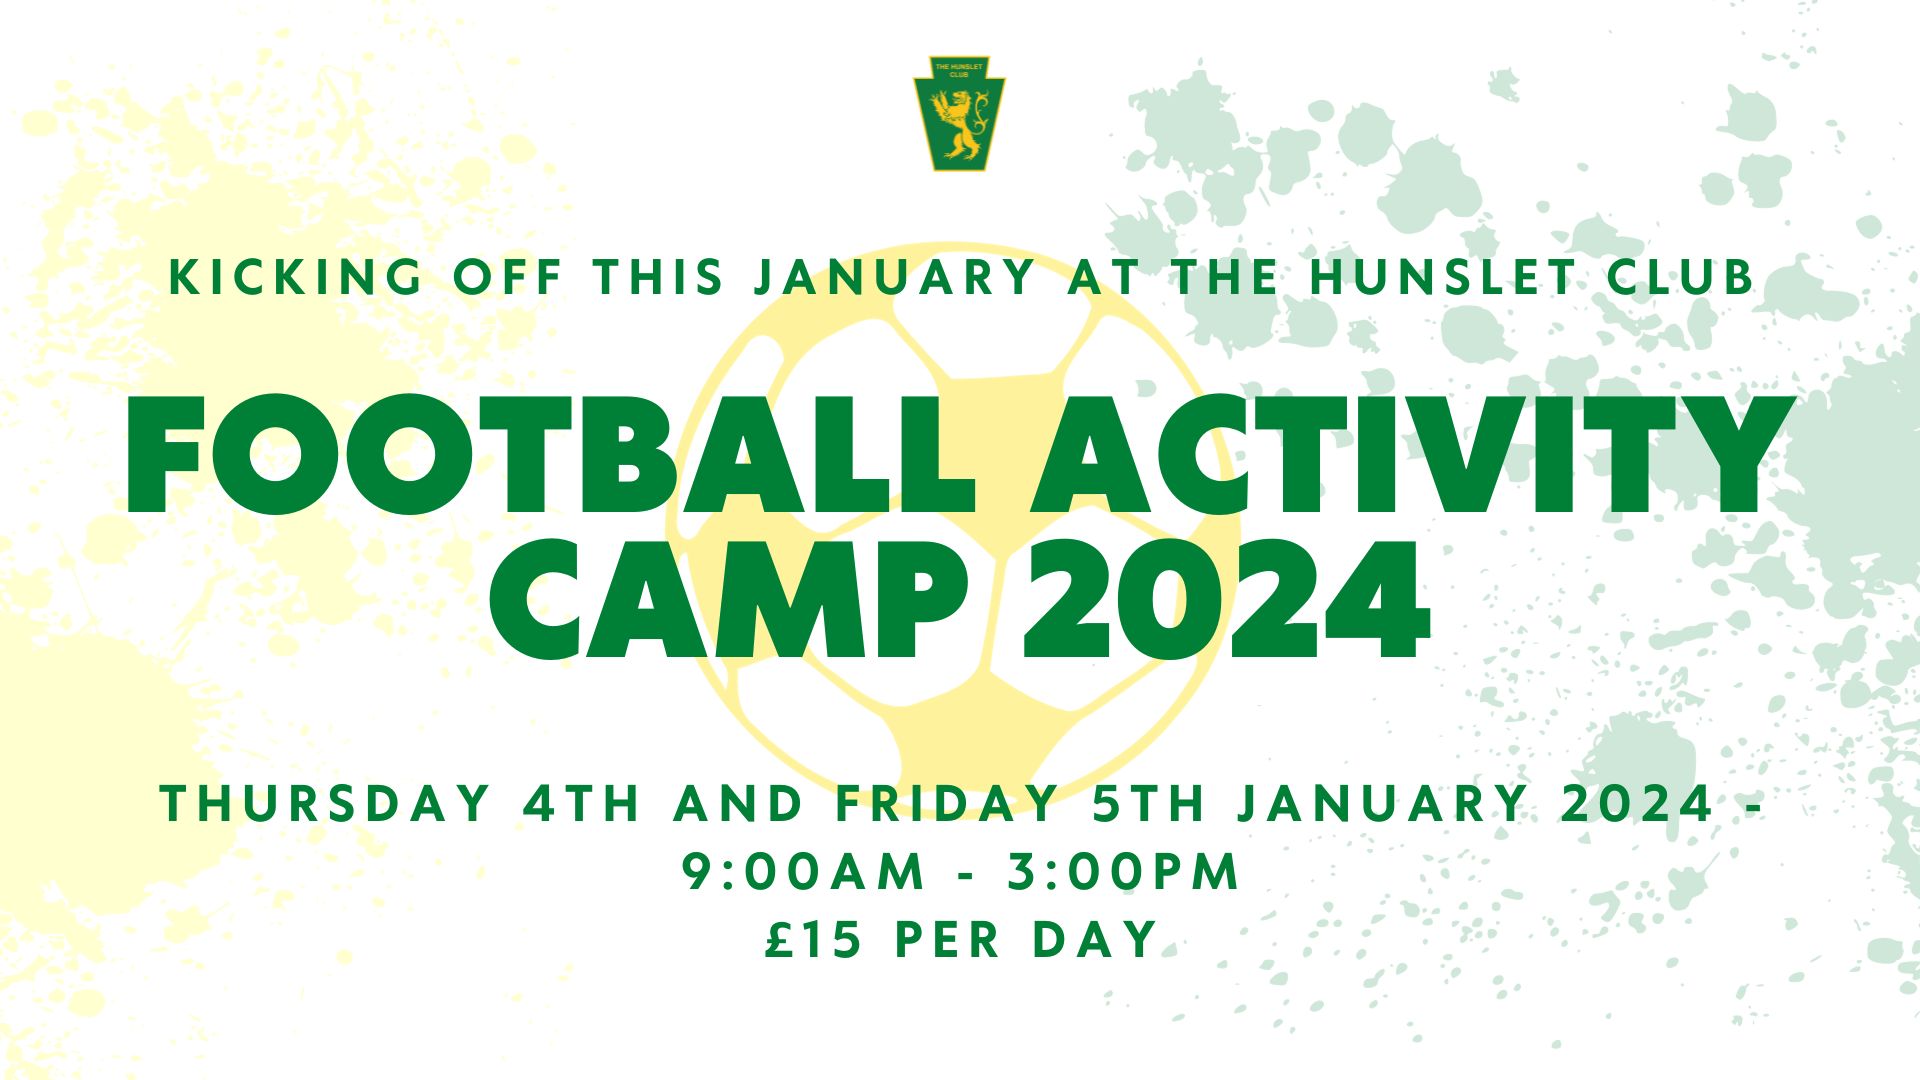 Kicking off this January at The Hunslet Club. Football Activity camp 2024. Thursday 4th and Friday 5th January 2024 - 9:00AM - 3:00pM £15 per day